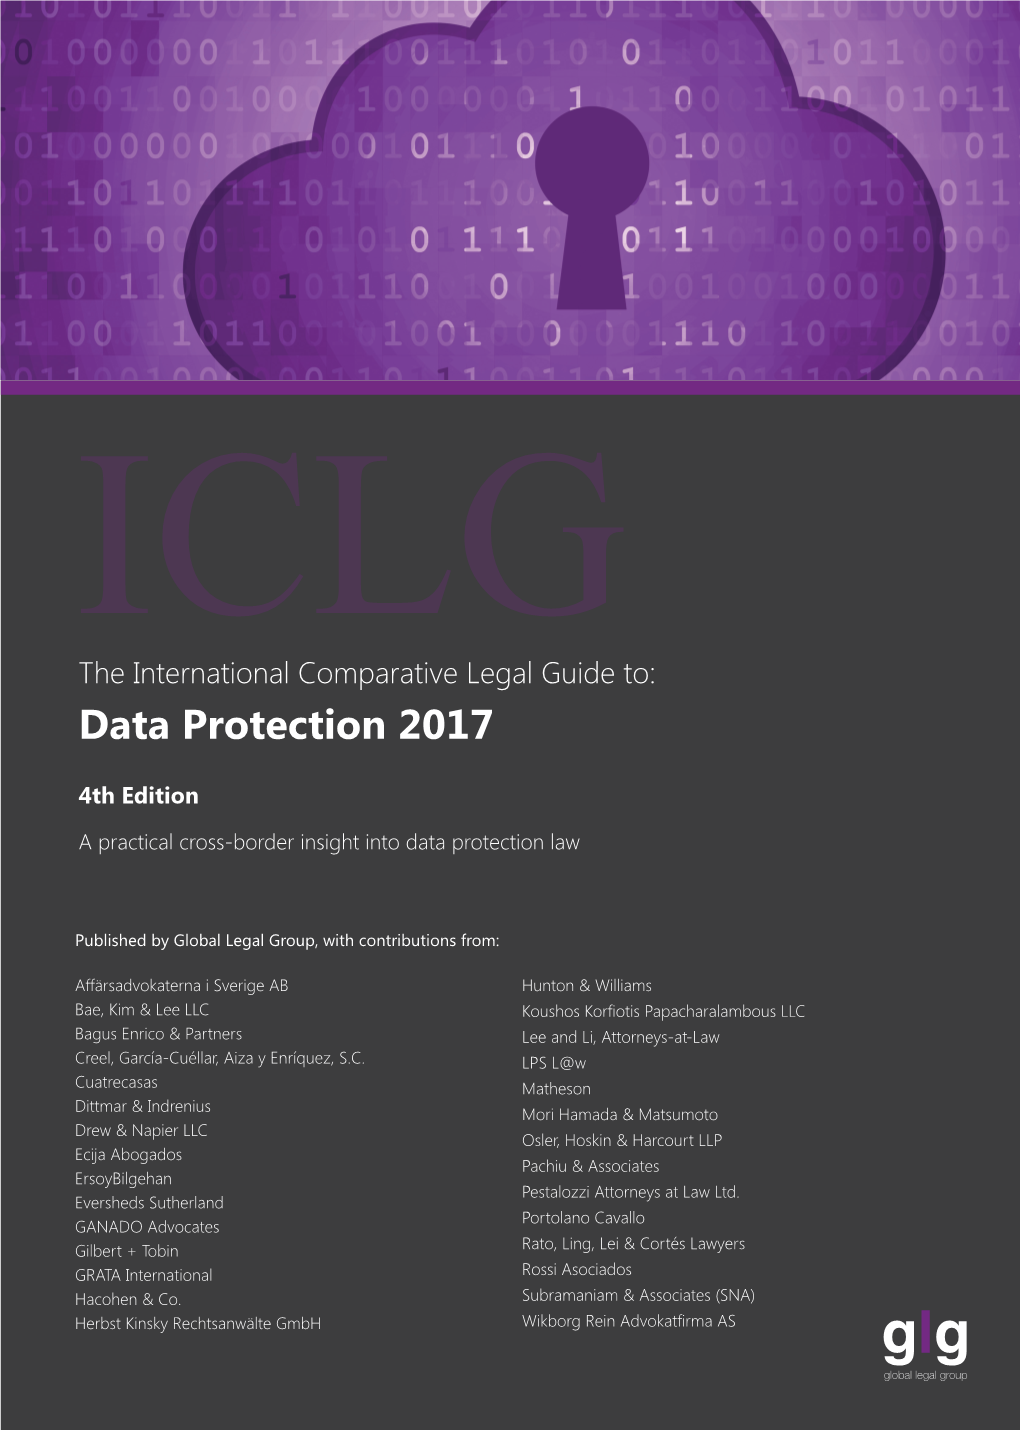 Data Protection 2017